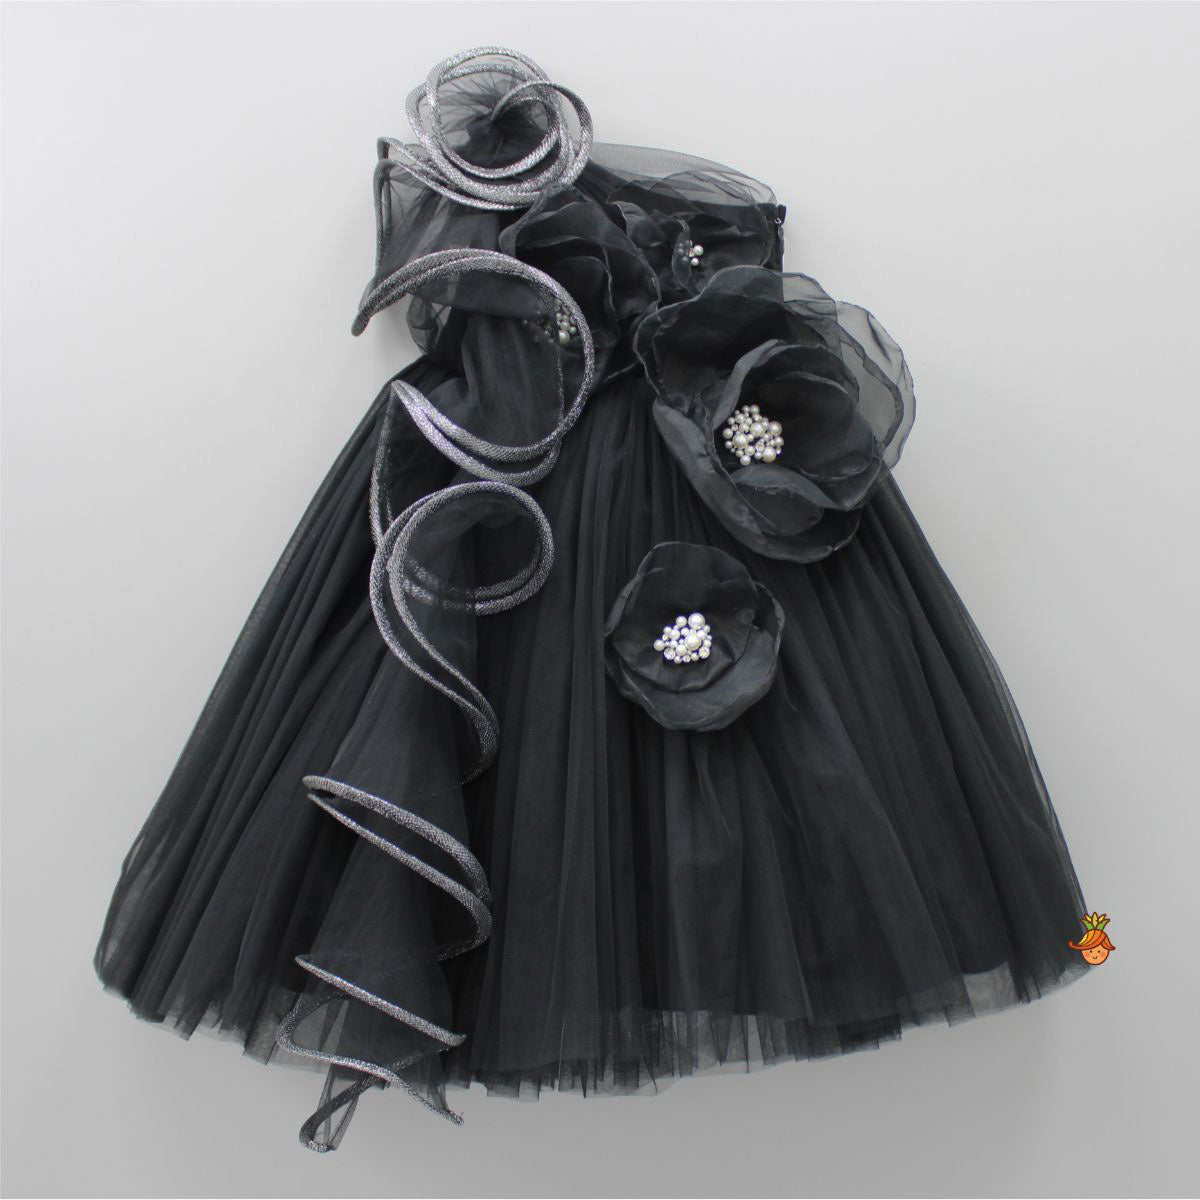 Pre Order: Pearly Adorable Flowers Adorned Black Ruffle Gown